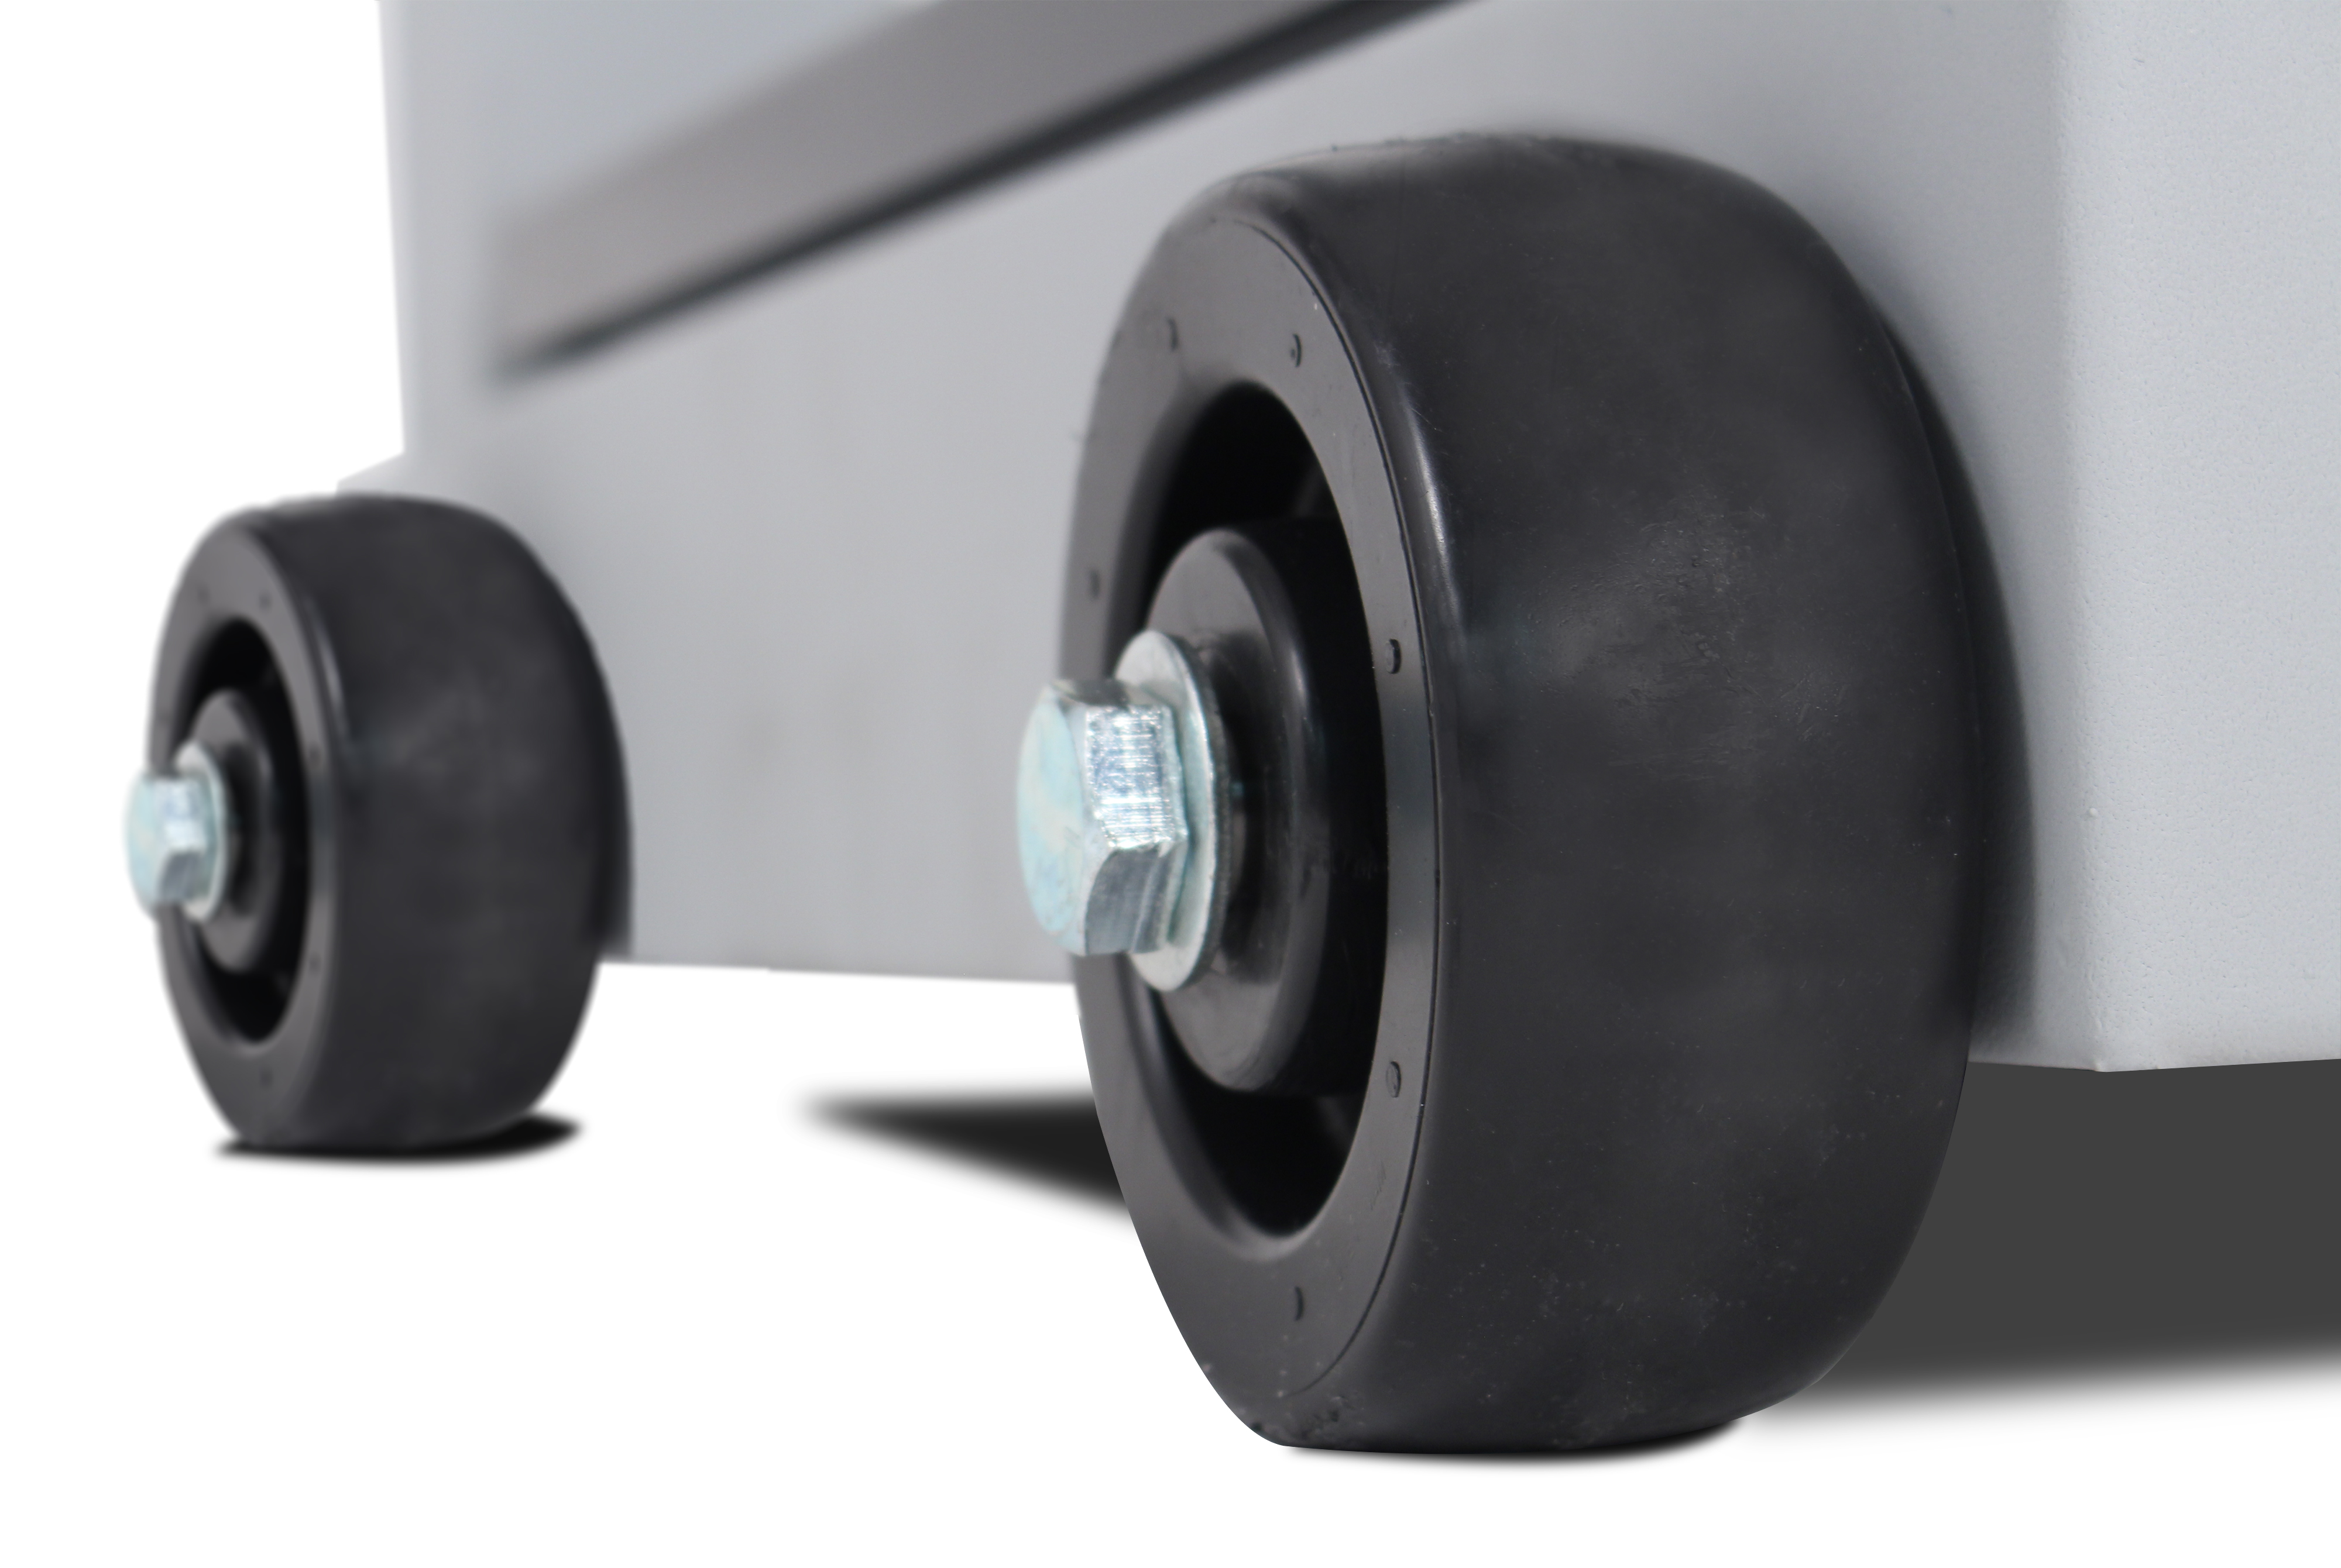 https://cardinalscale.com/themes/ee/site/default/asset/img/product/8852F-185B_Wheels.jpg